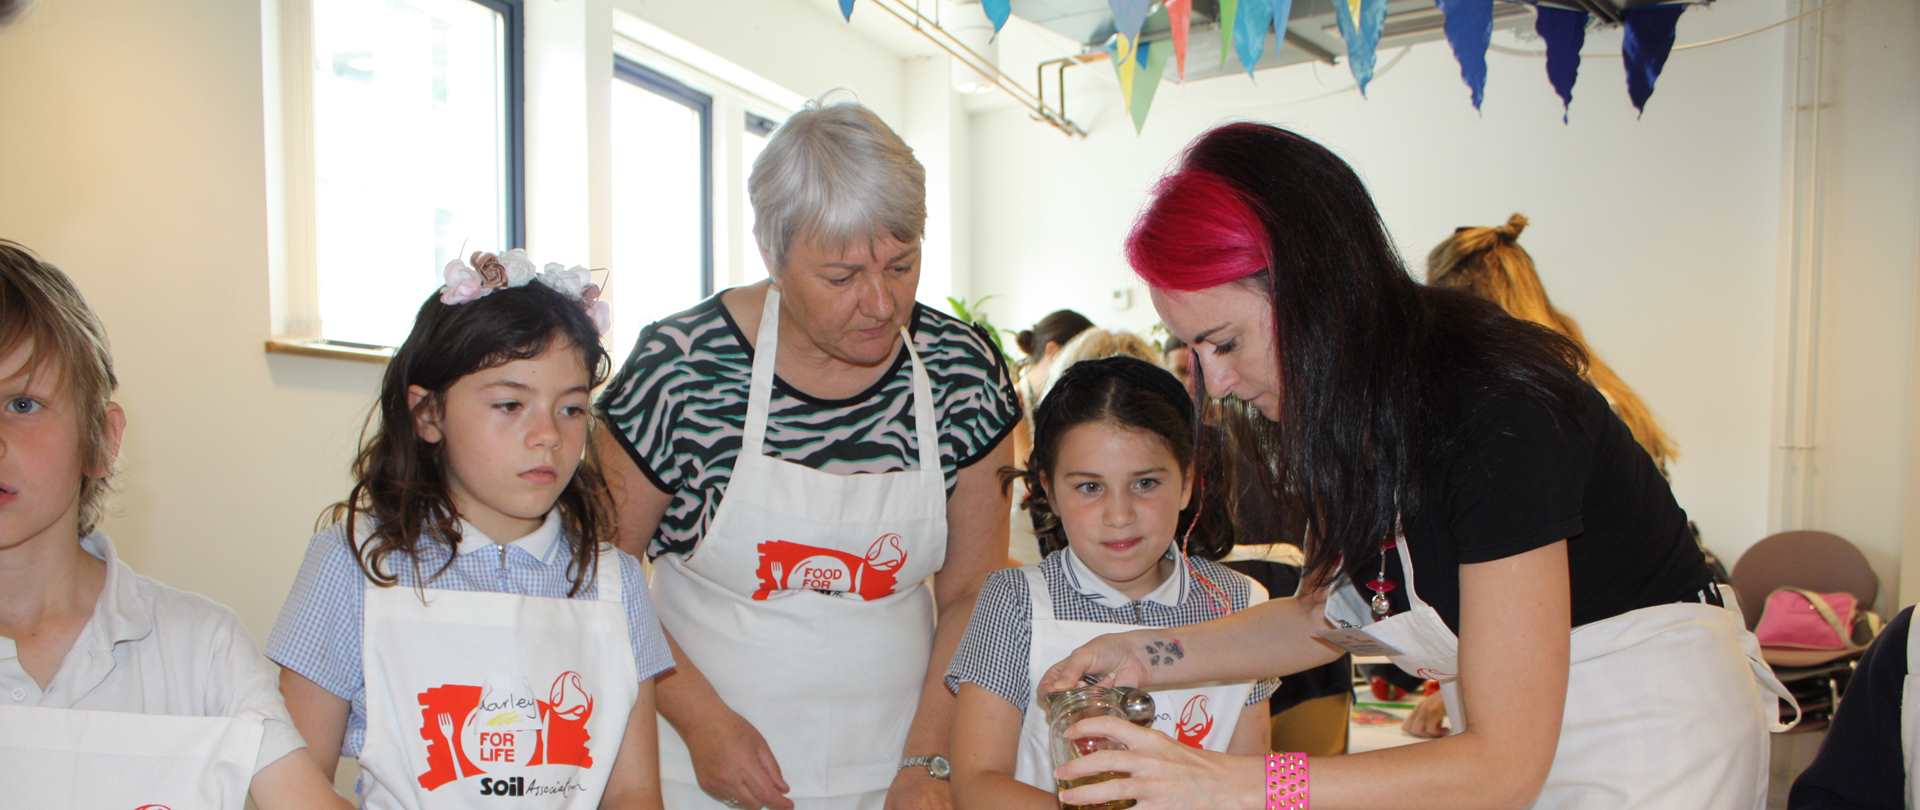 Tow adults and three children wearing Food for Life aprons cooking together